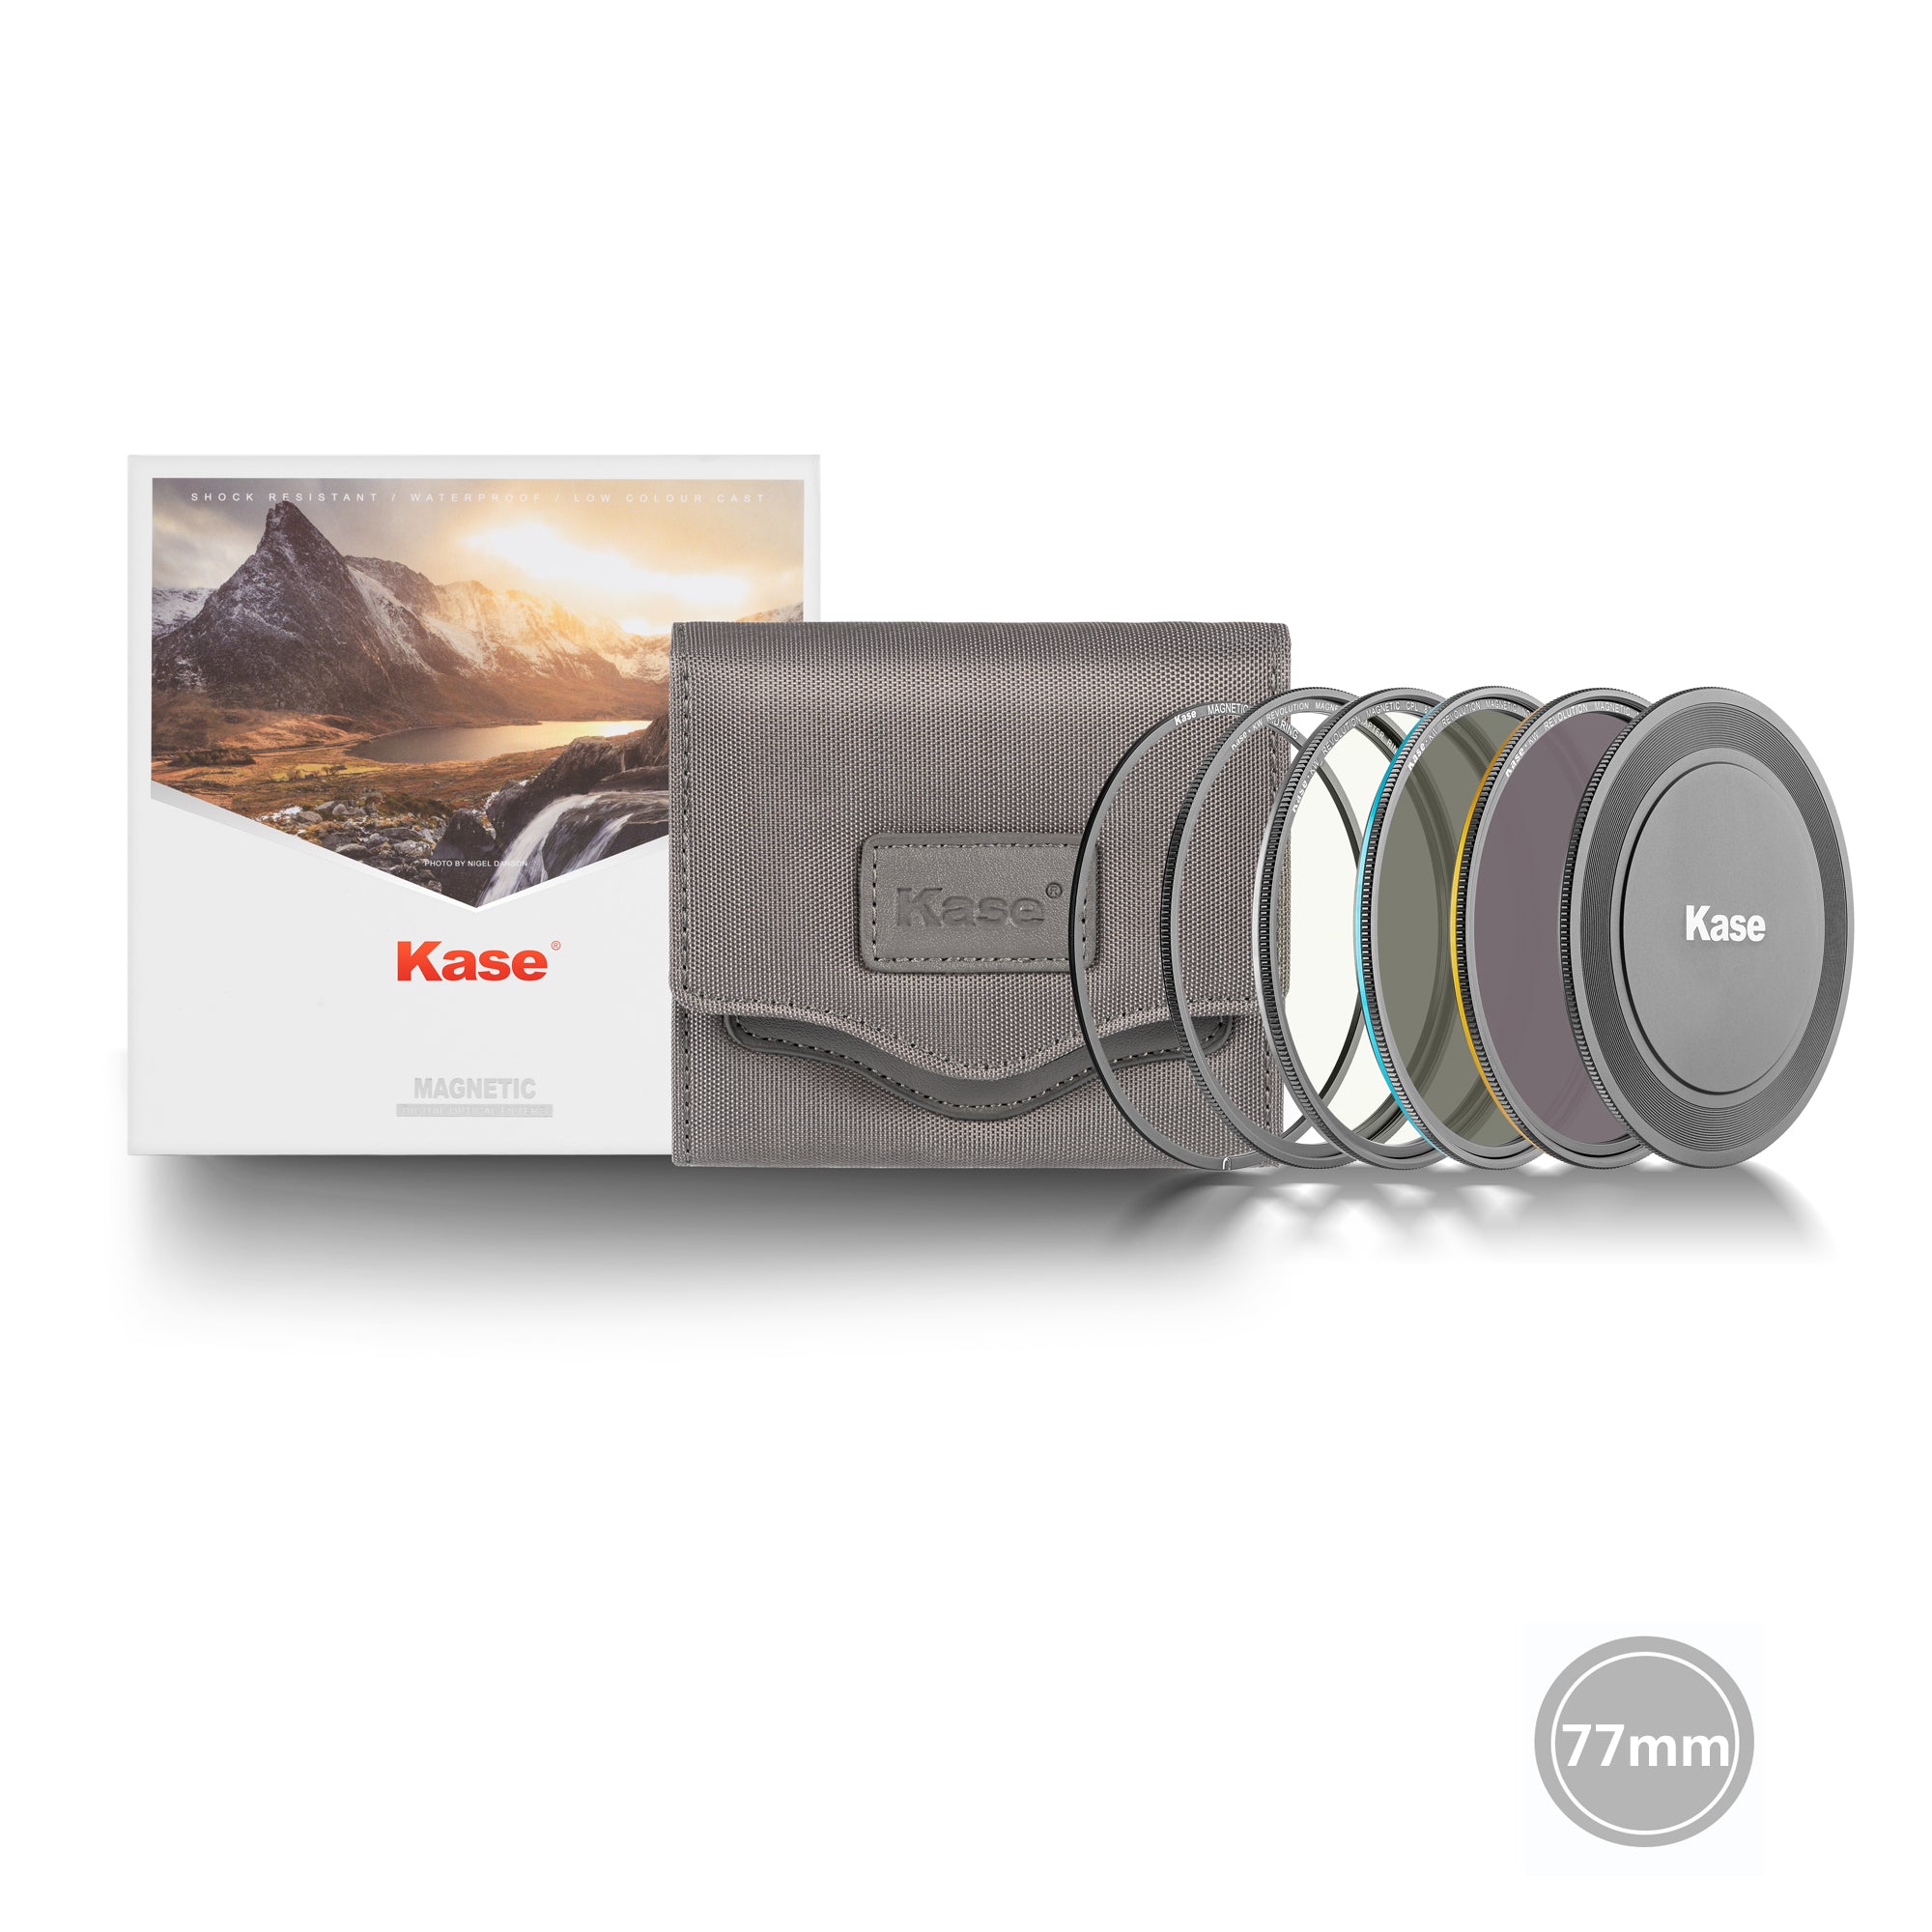 Product Image of Kase Revolution Magnetic Circular Filters 77mm Entry Kit